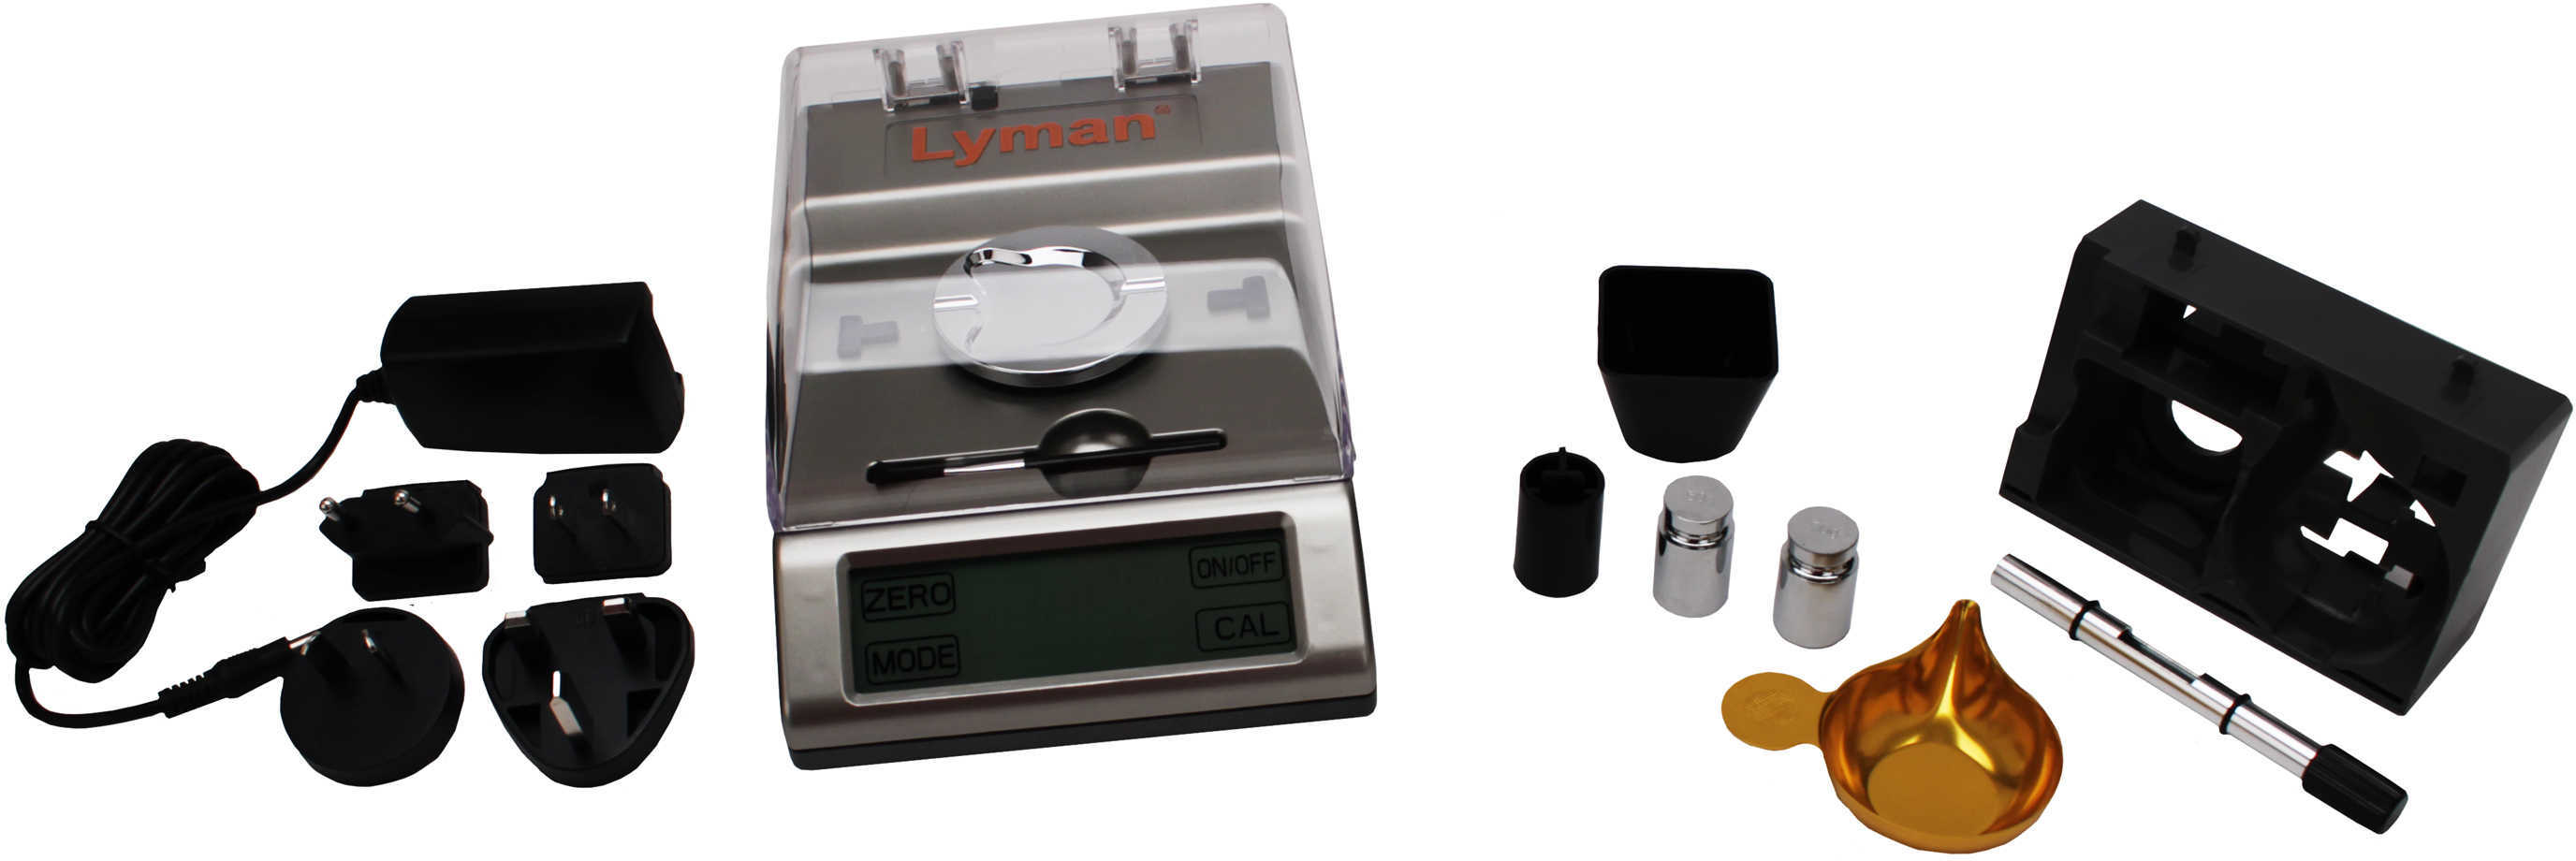 Accu-Touch 2000 Electronic Scale-img-1